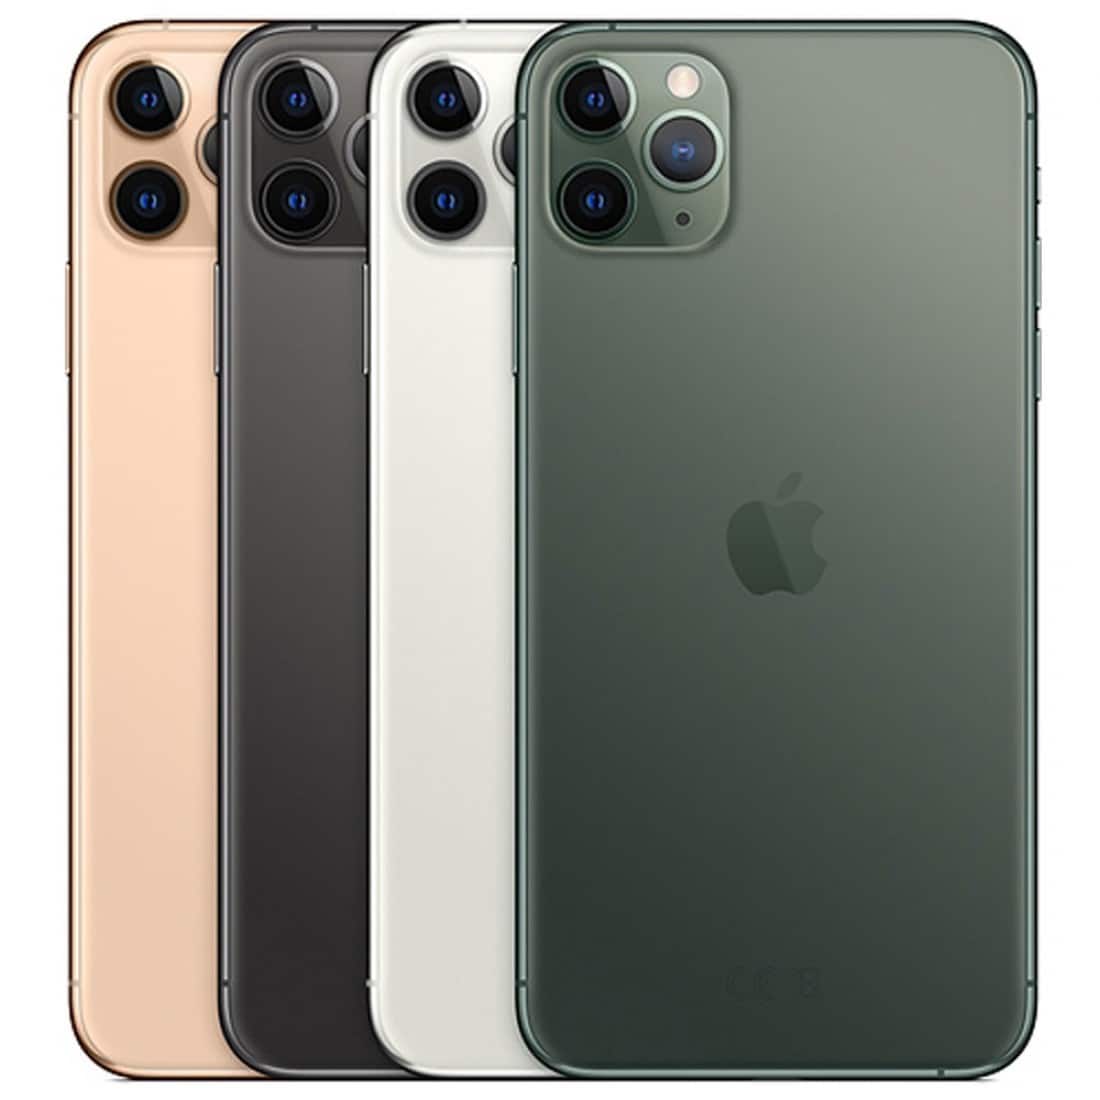 Apple iPhone 11 Pro Max: Price and Release date: